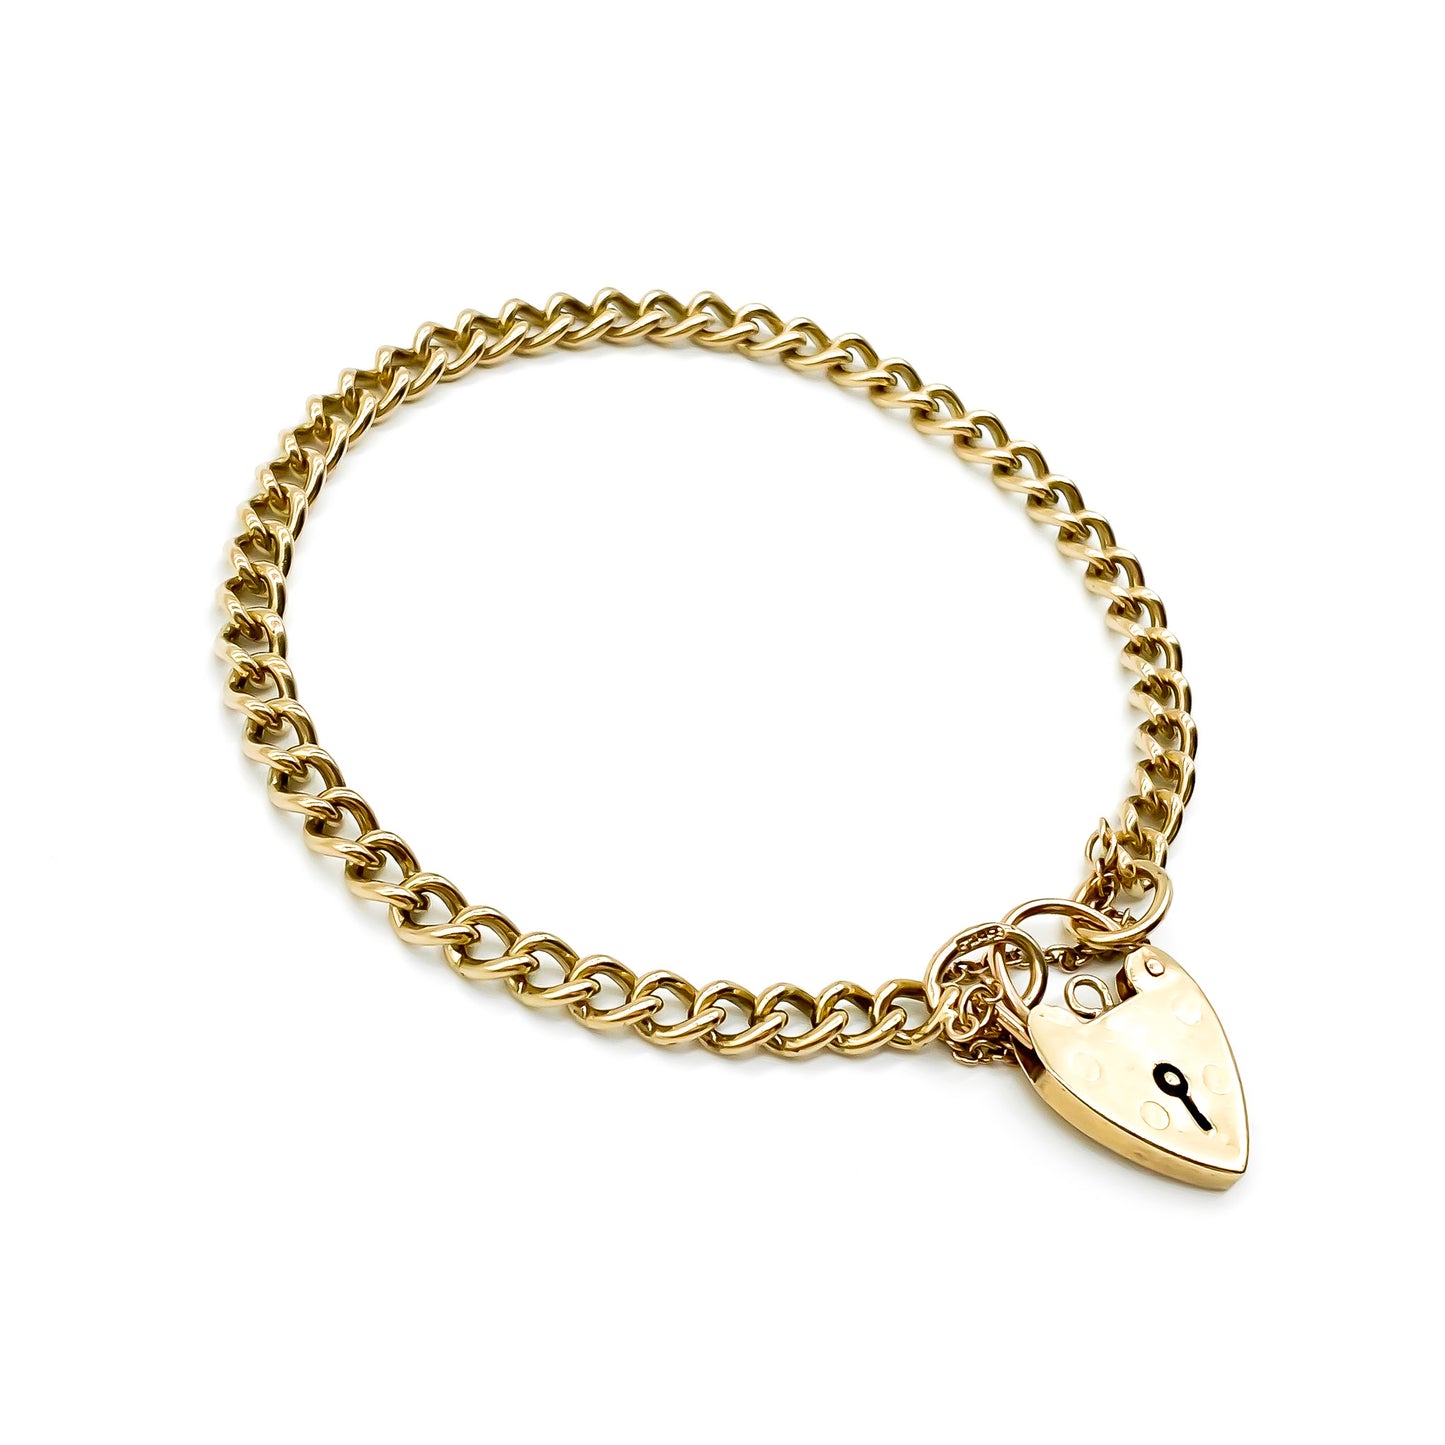 Classic 9ct yellow gold curb link bracelet with padlock. Safety chain attached. Circa 1940's